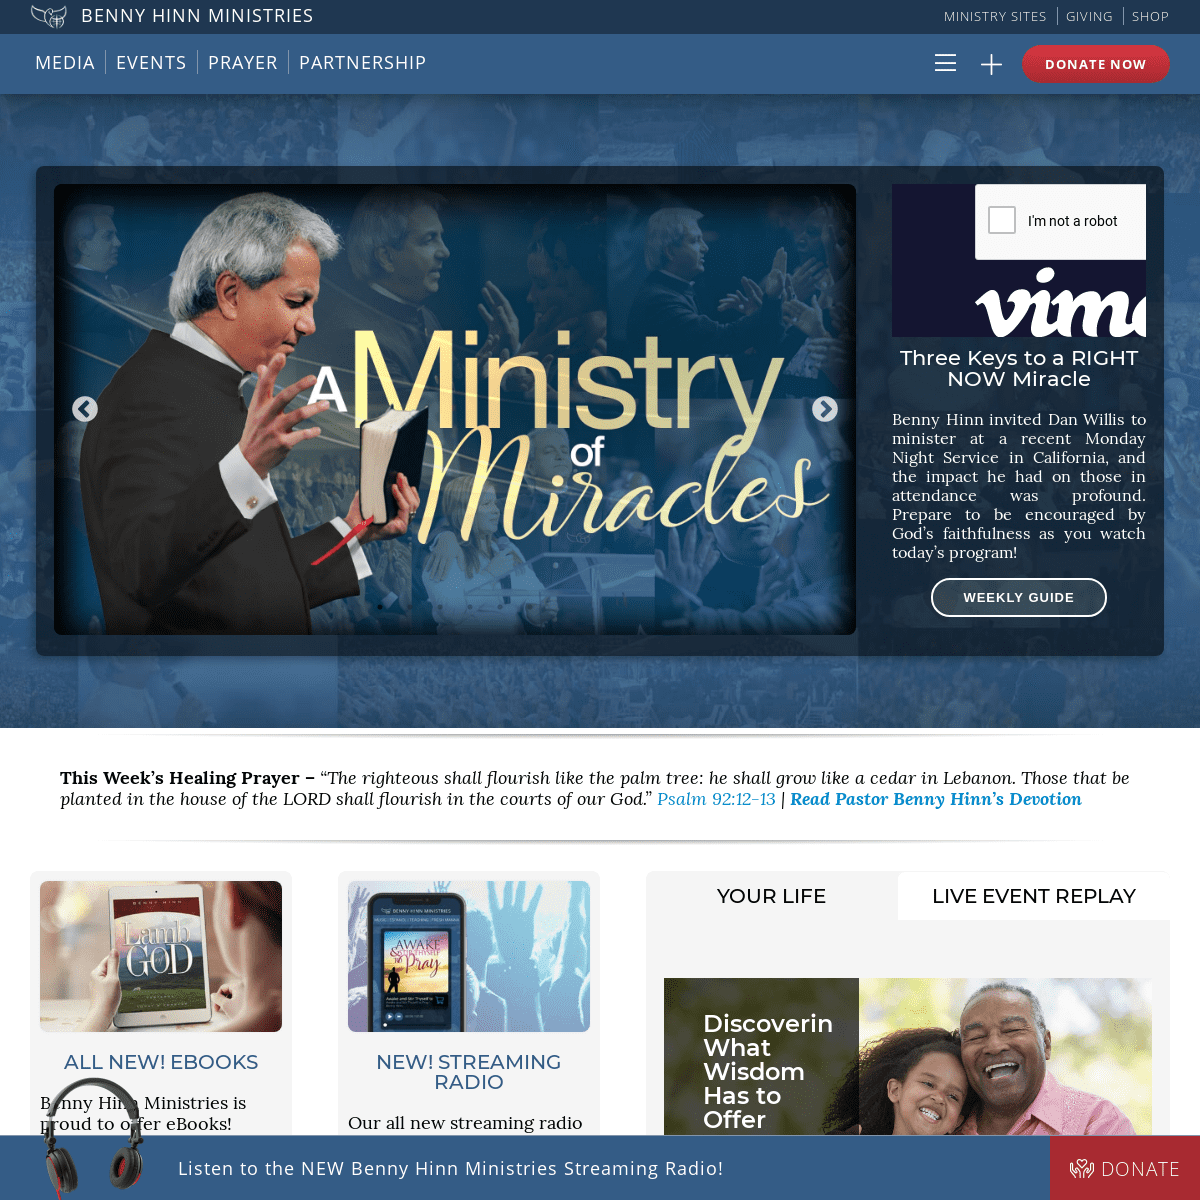 Welcome to Benny Hinn Ministries Official Website